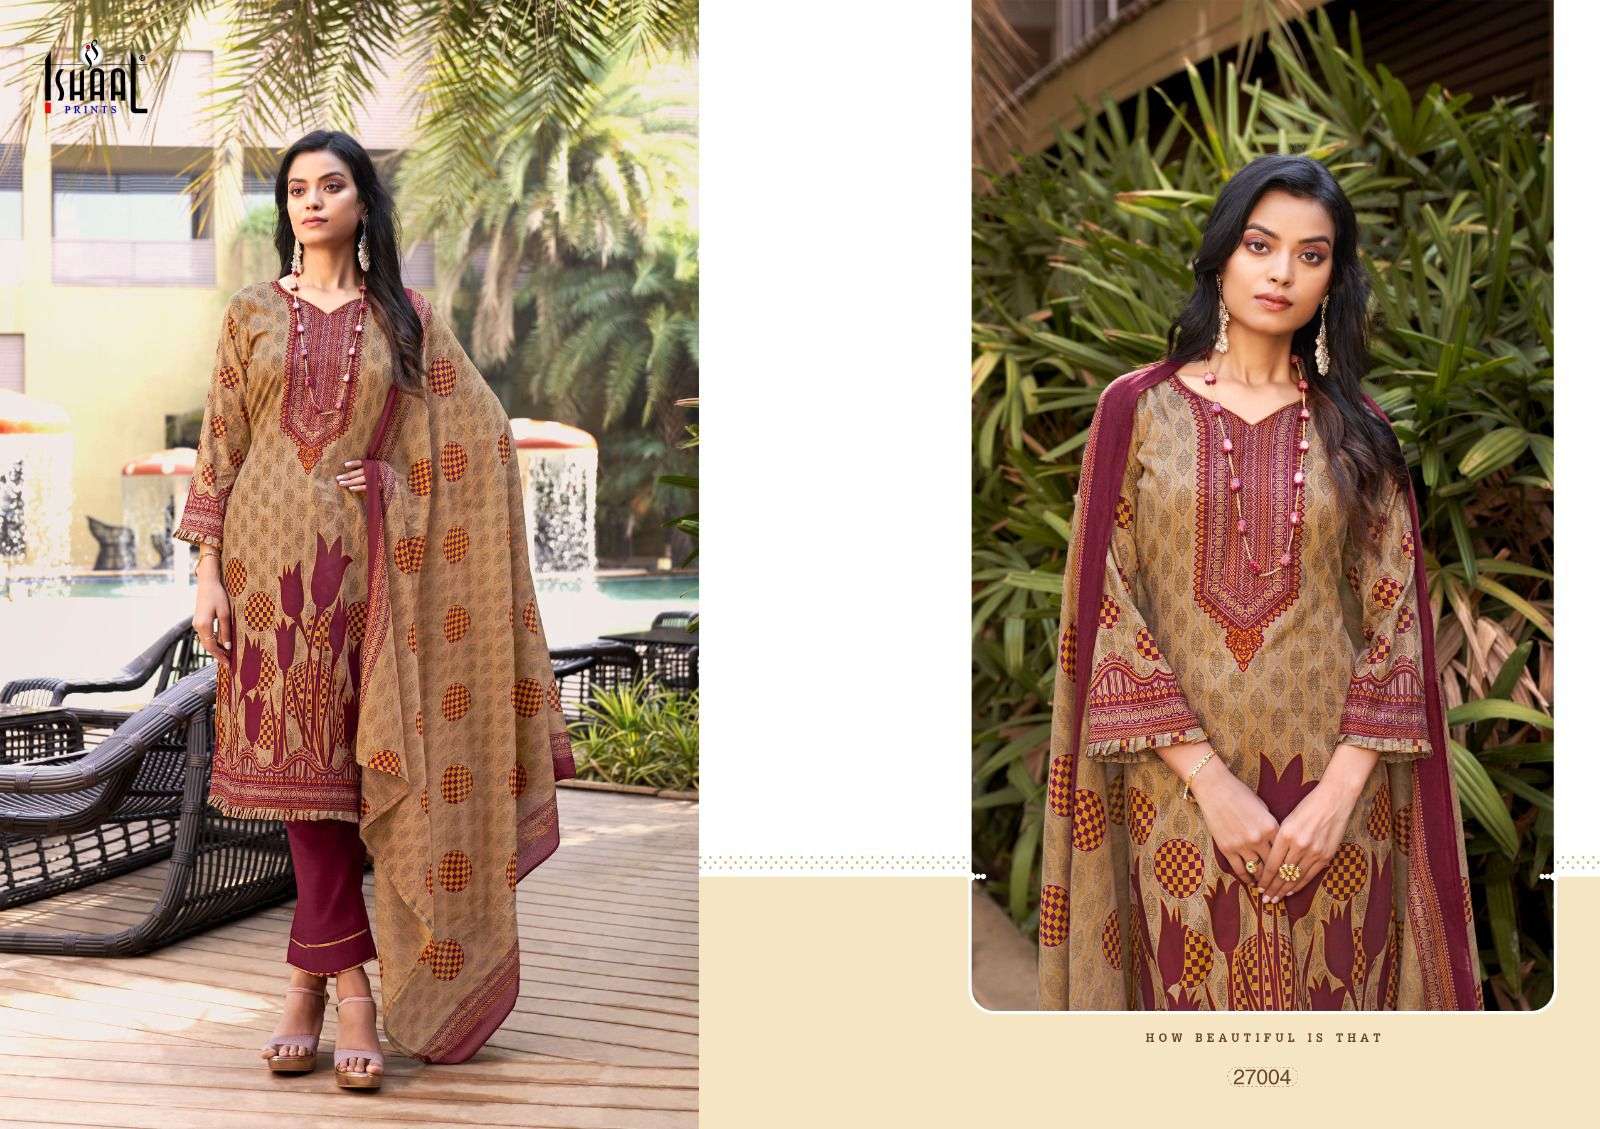 Gulmohar Vol-27 By Ishaal Prints 27001 To 27010 Series Beautiful Festive Suits Colorful Stylish Fancy Casual Wear & Ethnic Wear Pure Lawn Prints Dresses At Wholesale Price